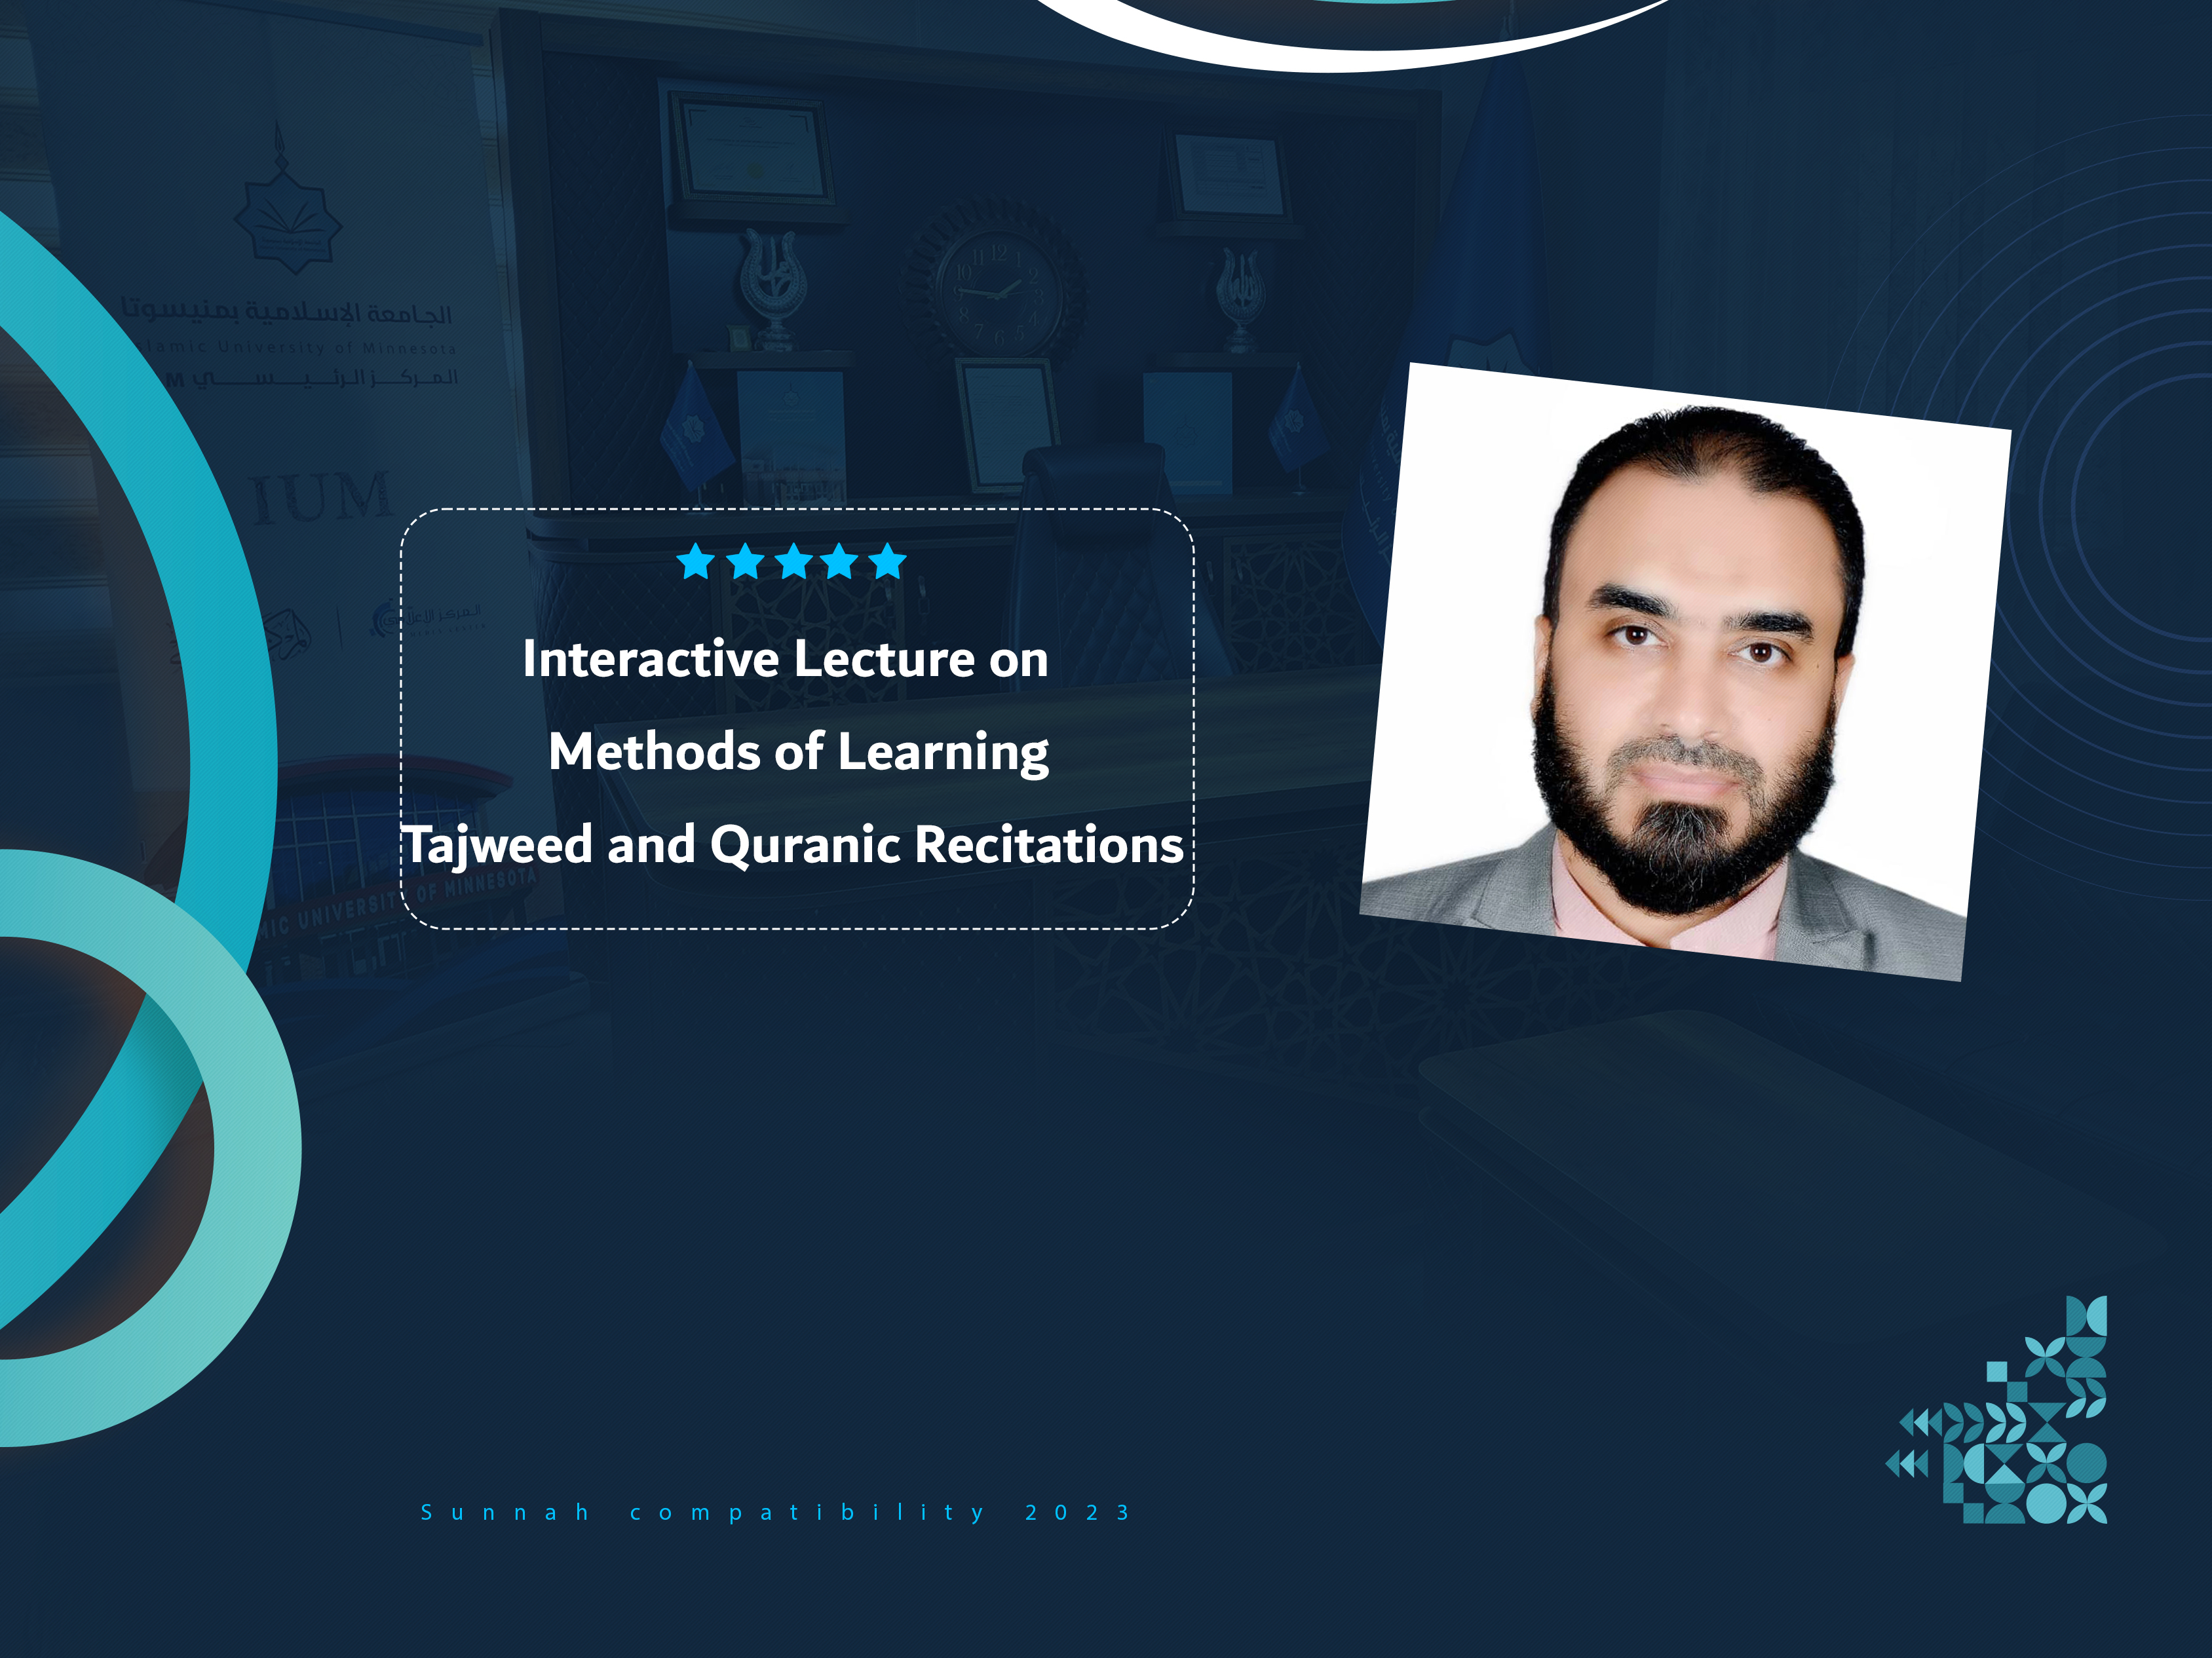 Interactive Lecture on Methods of Learning Tajweed and Quranic Recitations